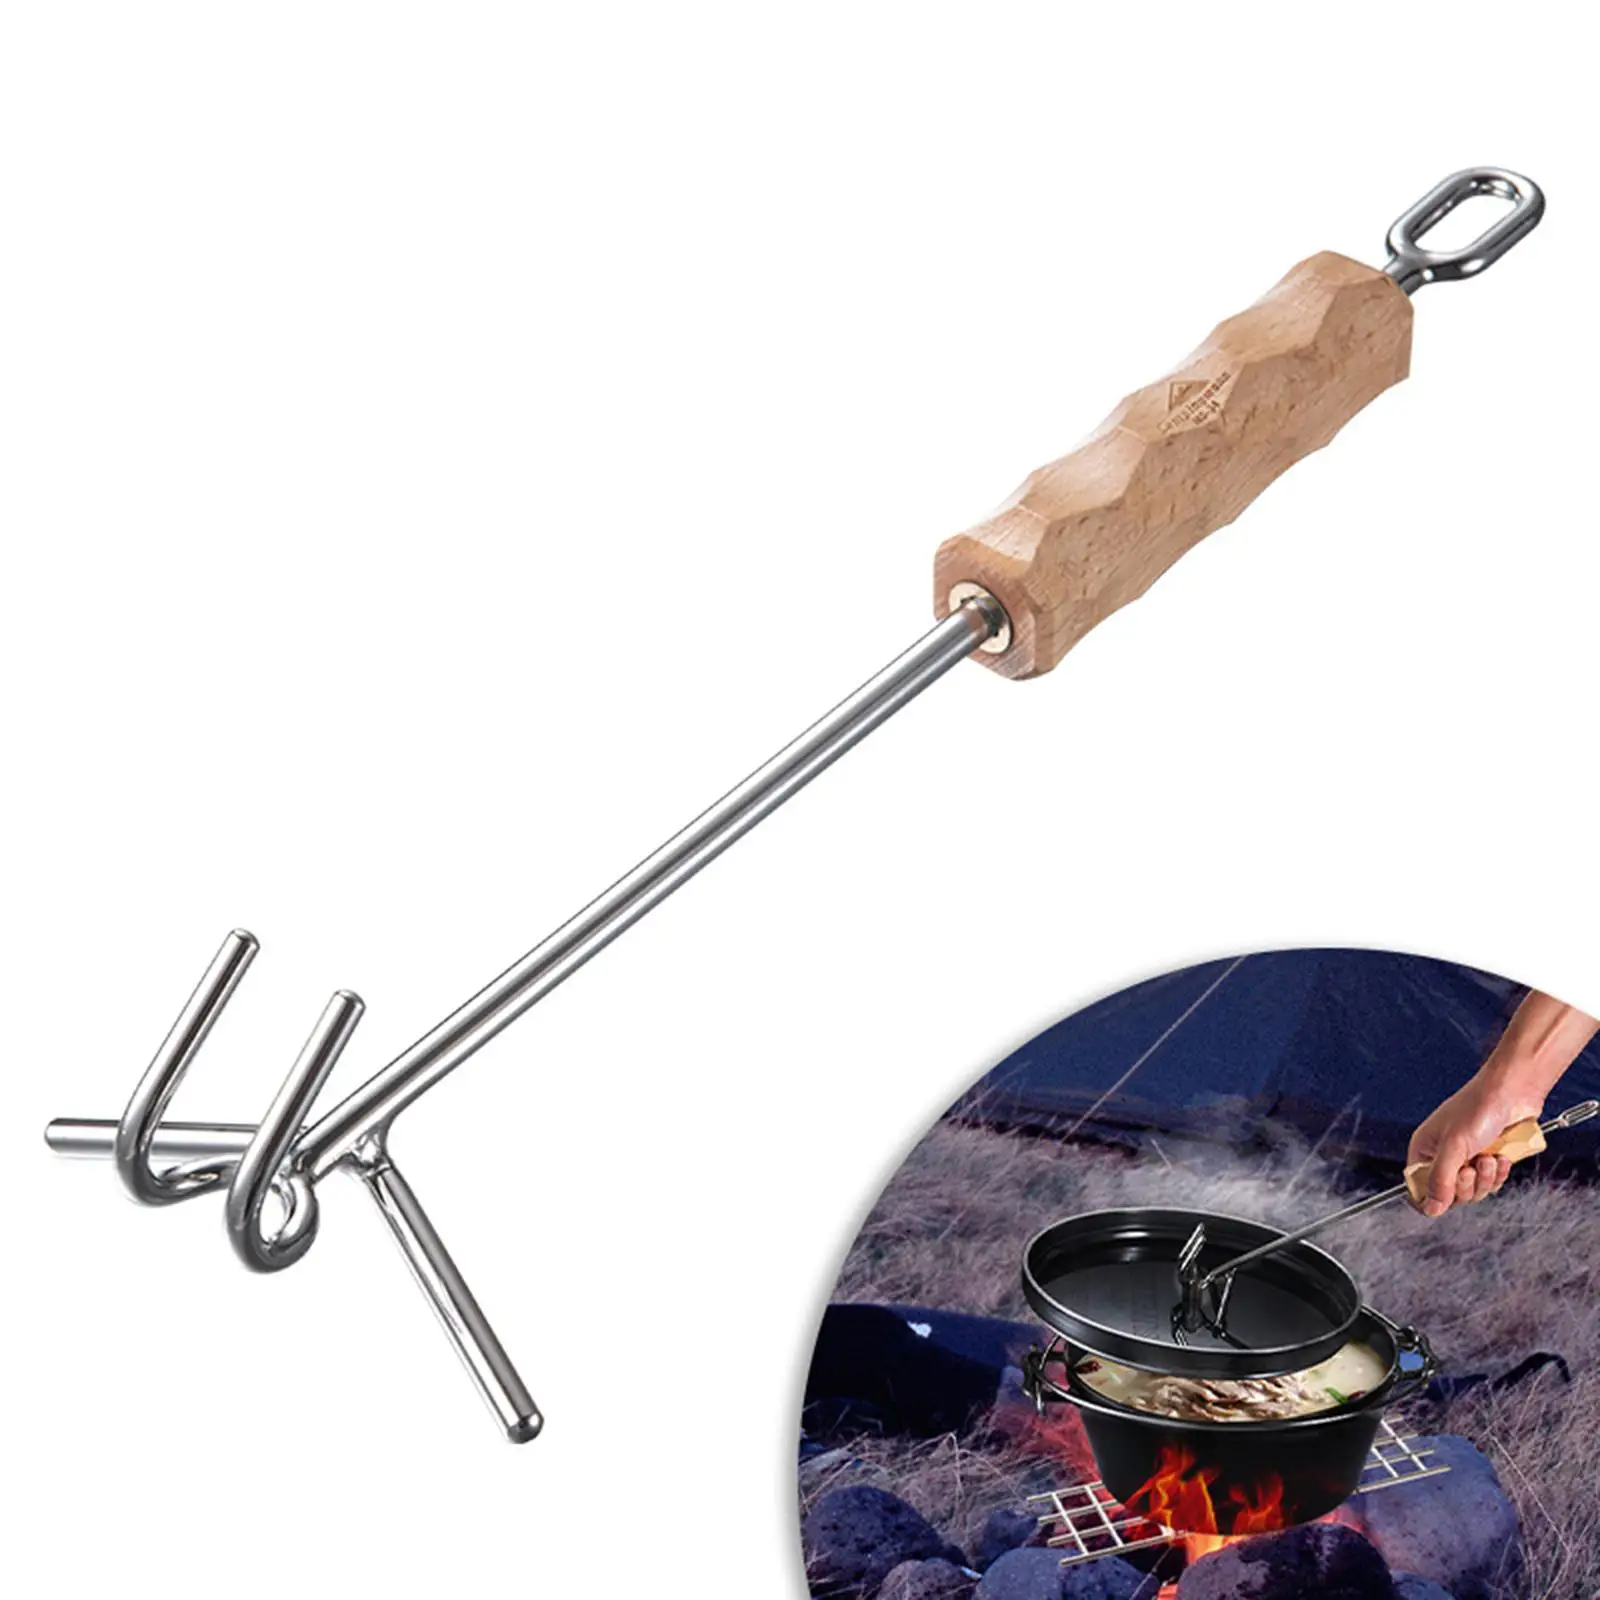 Beech Handle for Lifting And Carrying Scratch Resistant Dutch Oven 14 Inch Stainless Steel Cookware